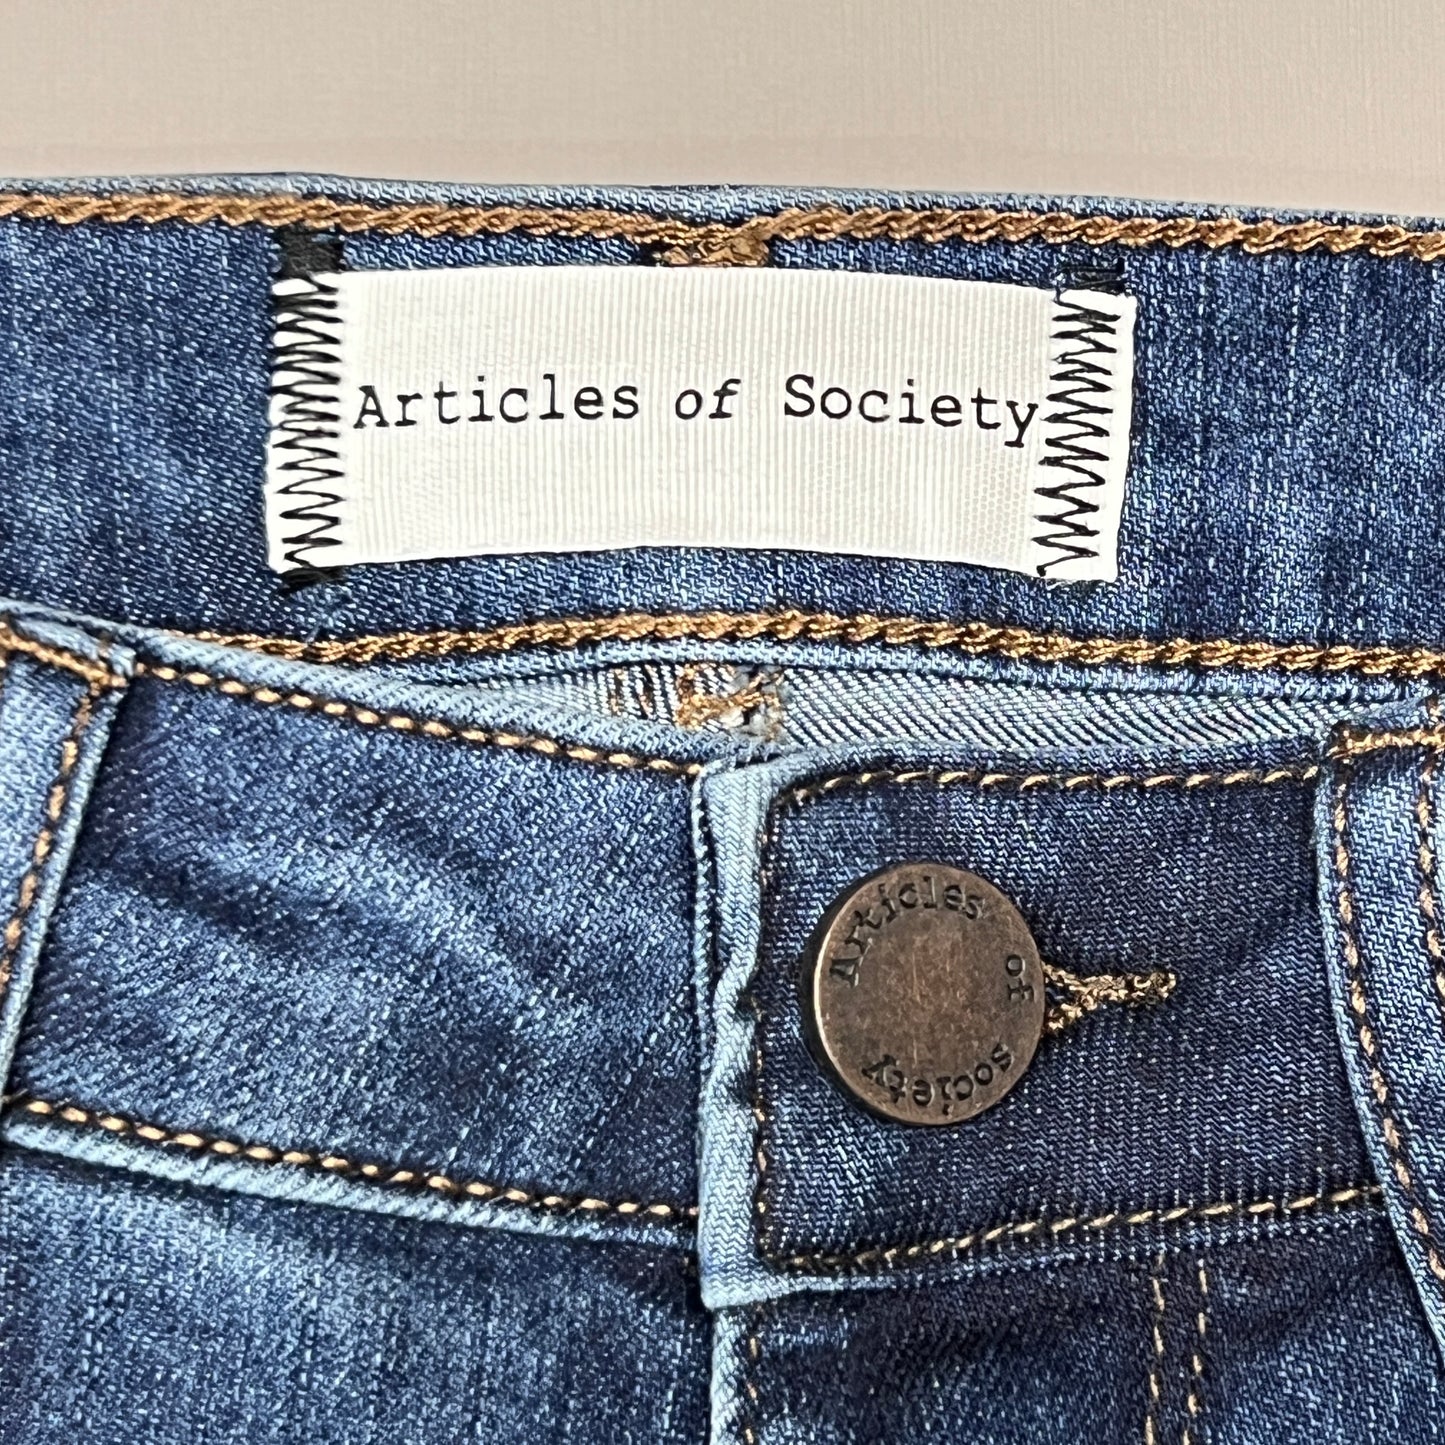 ARTICLES OF SOCIETY Hilo Ripped Denim Jeans Women's Sz 26 Blue 5350PLV-706 (New)